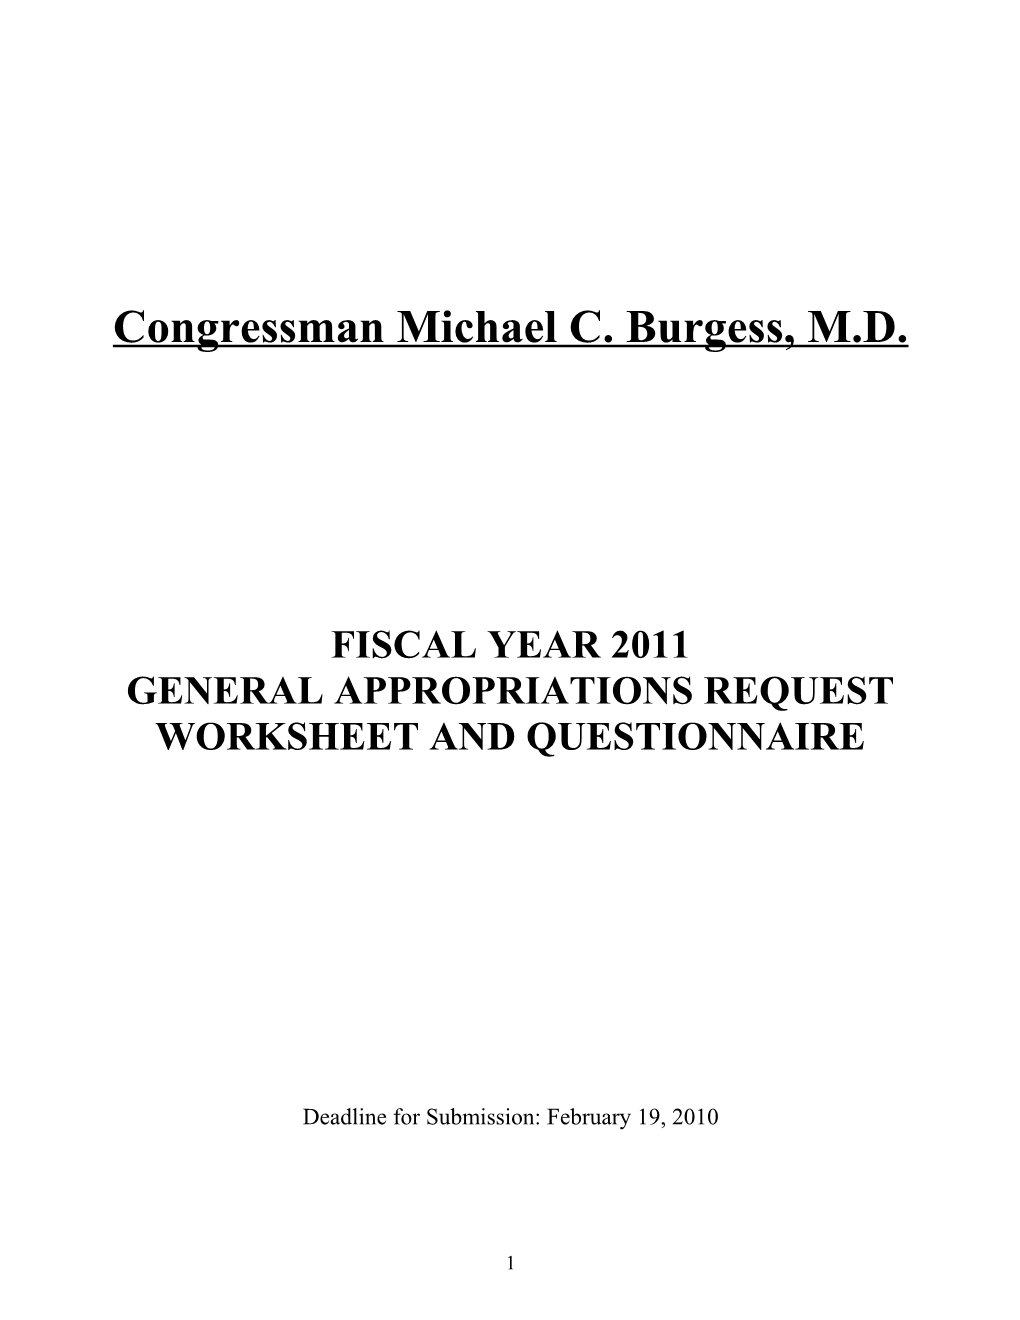 General Appropriations Request Worksheet and Questionnaire